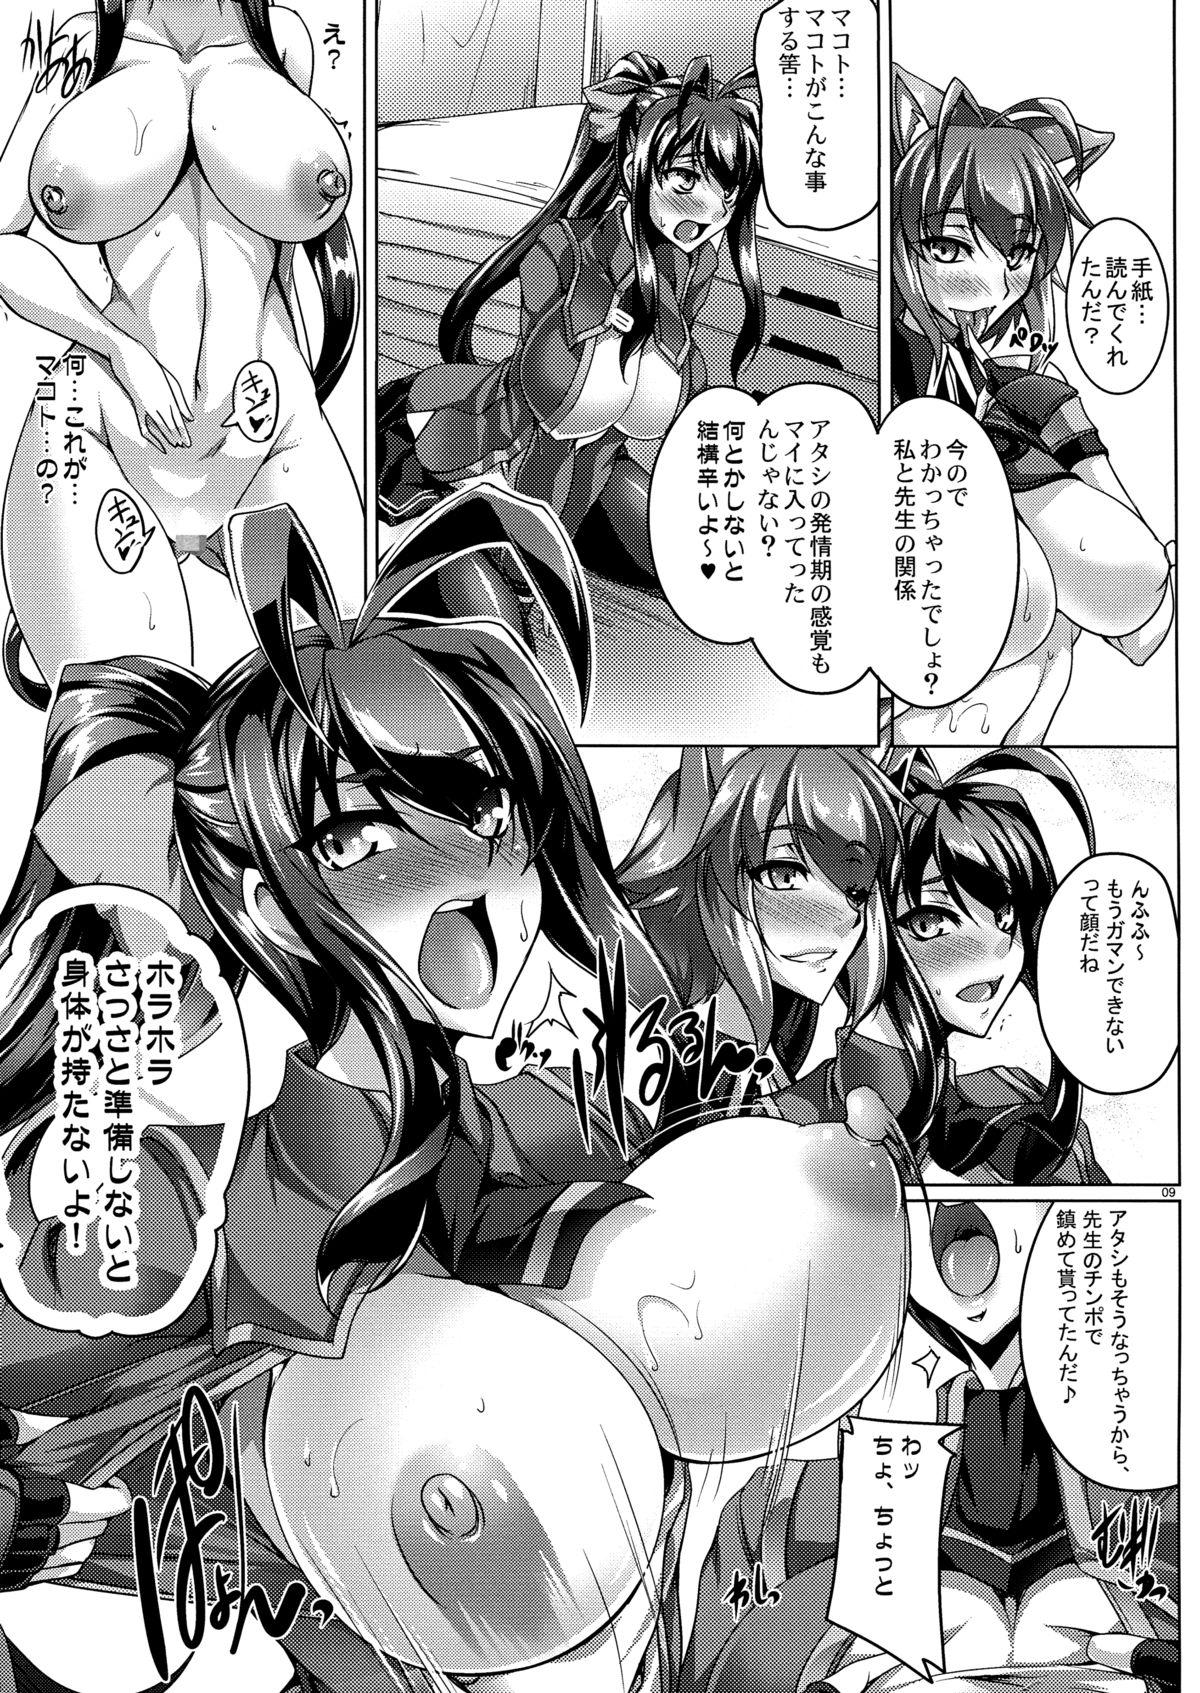 Teensnow RE MIX MY HEART!! - Blazblue Passionate - Page 9